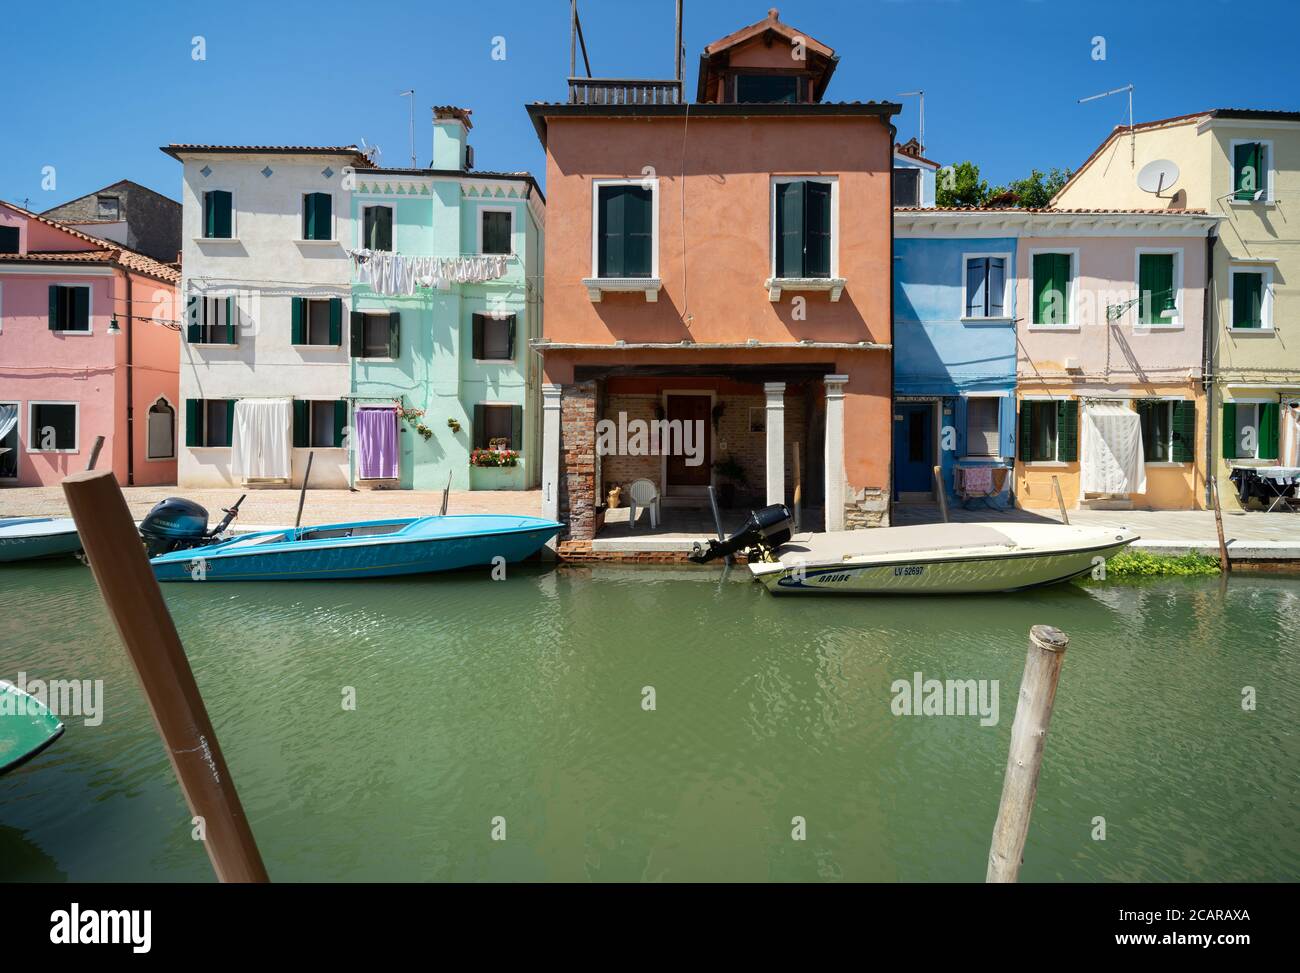 Burano island, Venetian Lagoon, Venice, Italy, panorama with the typical coloured fisherman homes frontages overlooking a canal with small boats Stock Photo